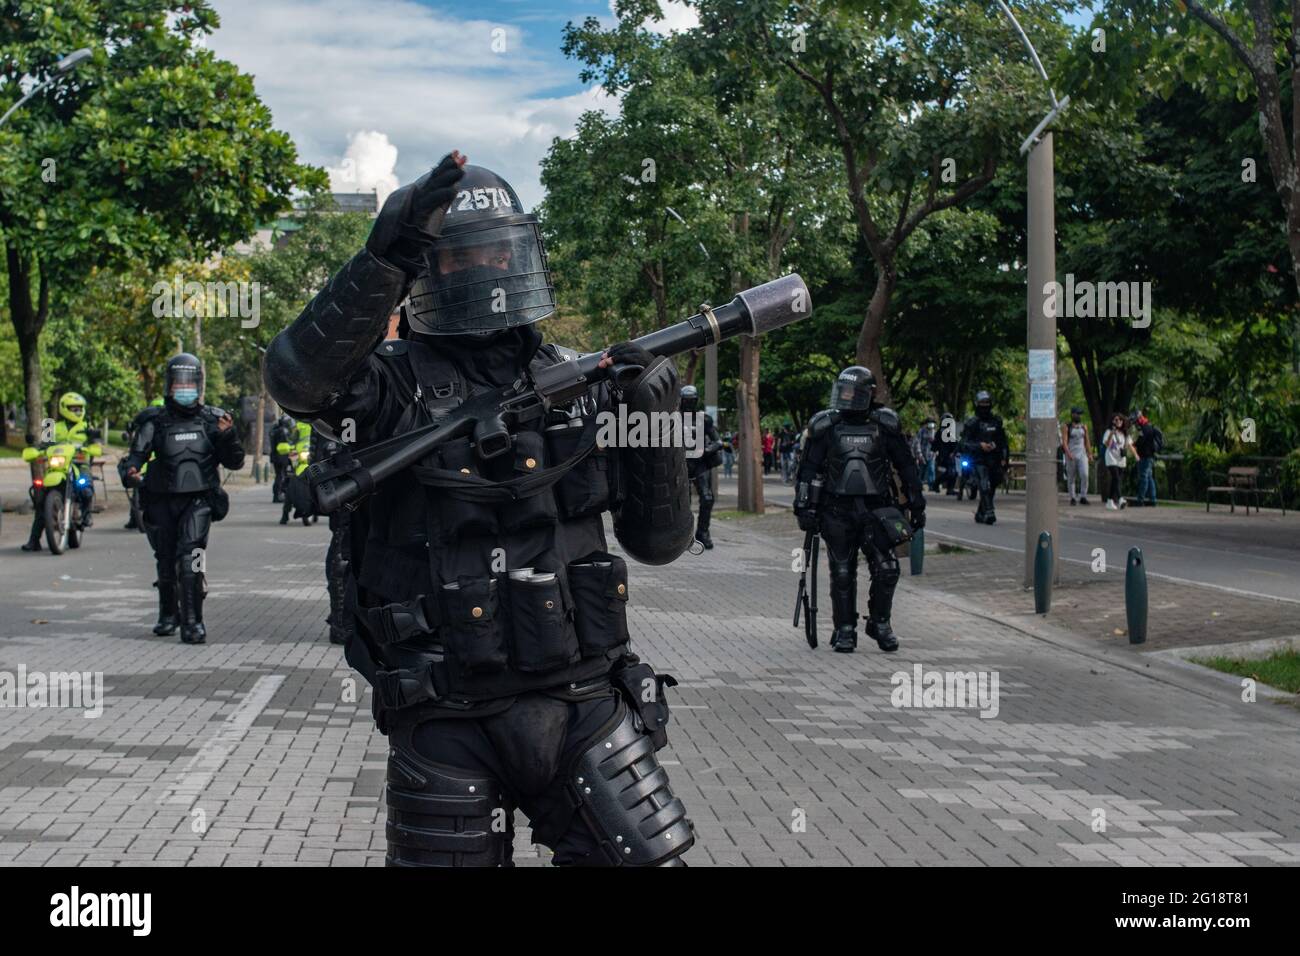 Colombia's riot police officers (ESMAD) carrying 12 gounge traumatic and tear gas shutguns as clashes between demonstrators and Colombia's riot police (ESMAD) erupt in Medellín, Colombia after several weeks of anti-government protest against President Ivan Duque's tax and health reforms and unrest and abuse of authority cases that leave at least 70 dead according to NGOs on June 4, 2021. Stock Photo